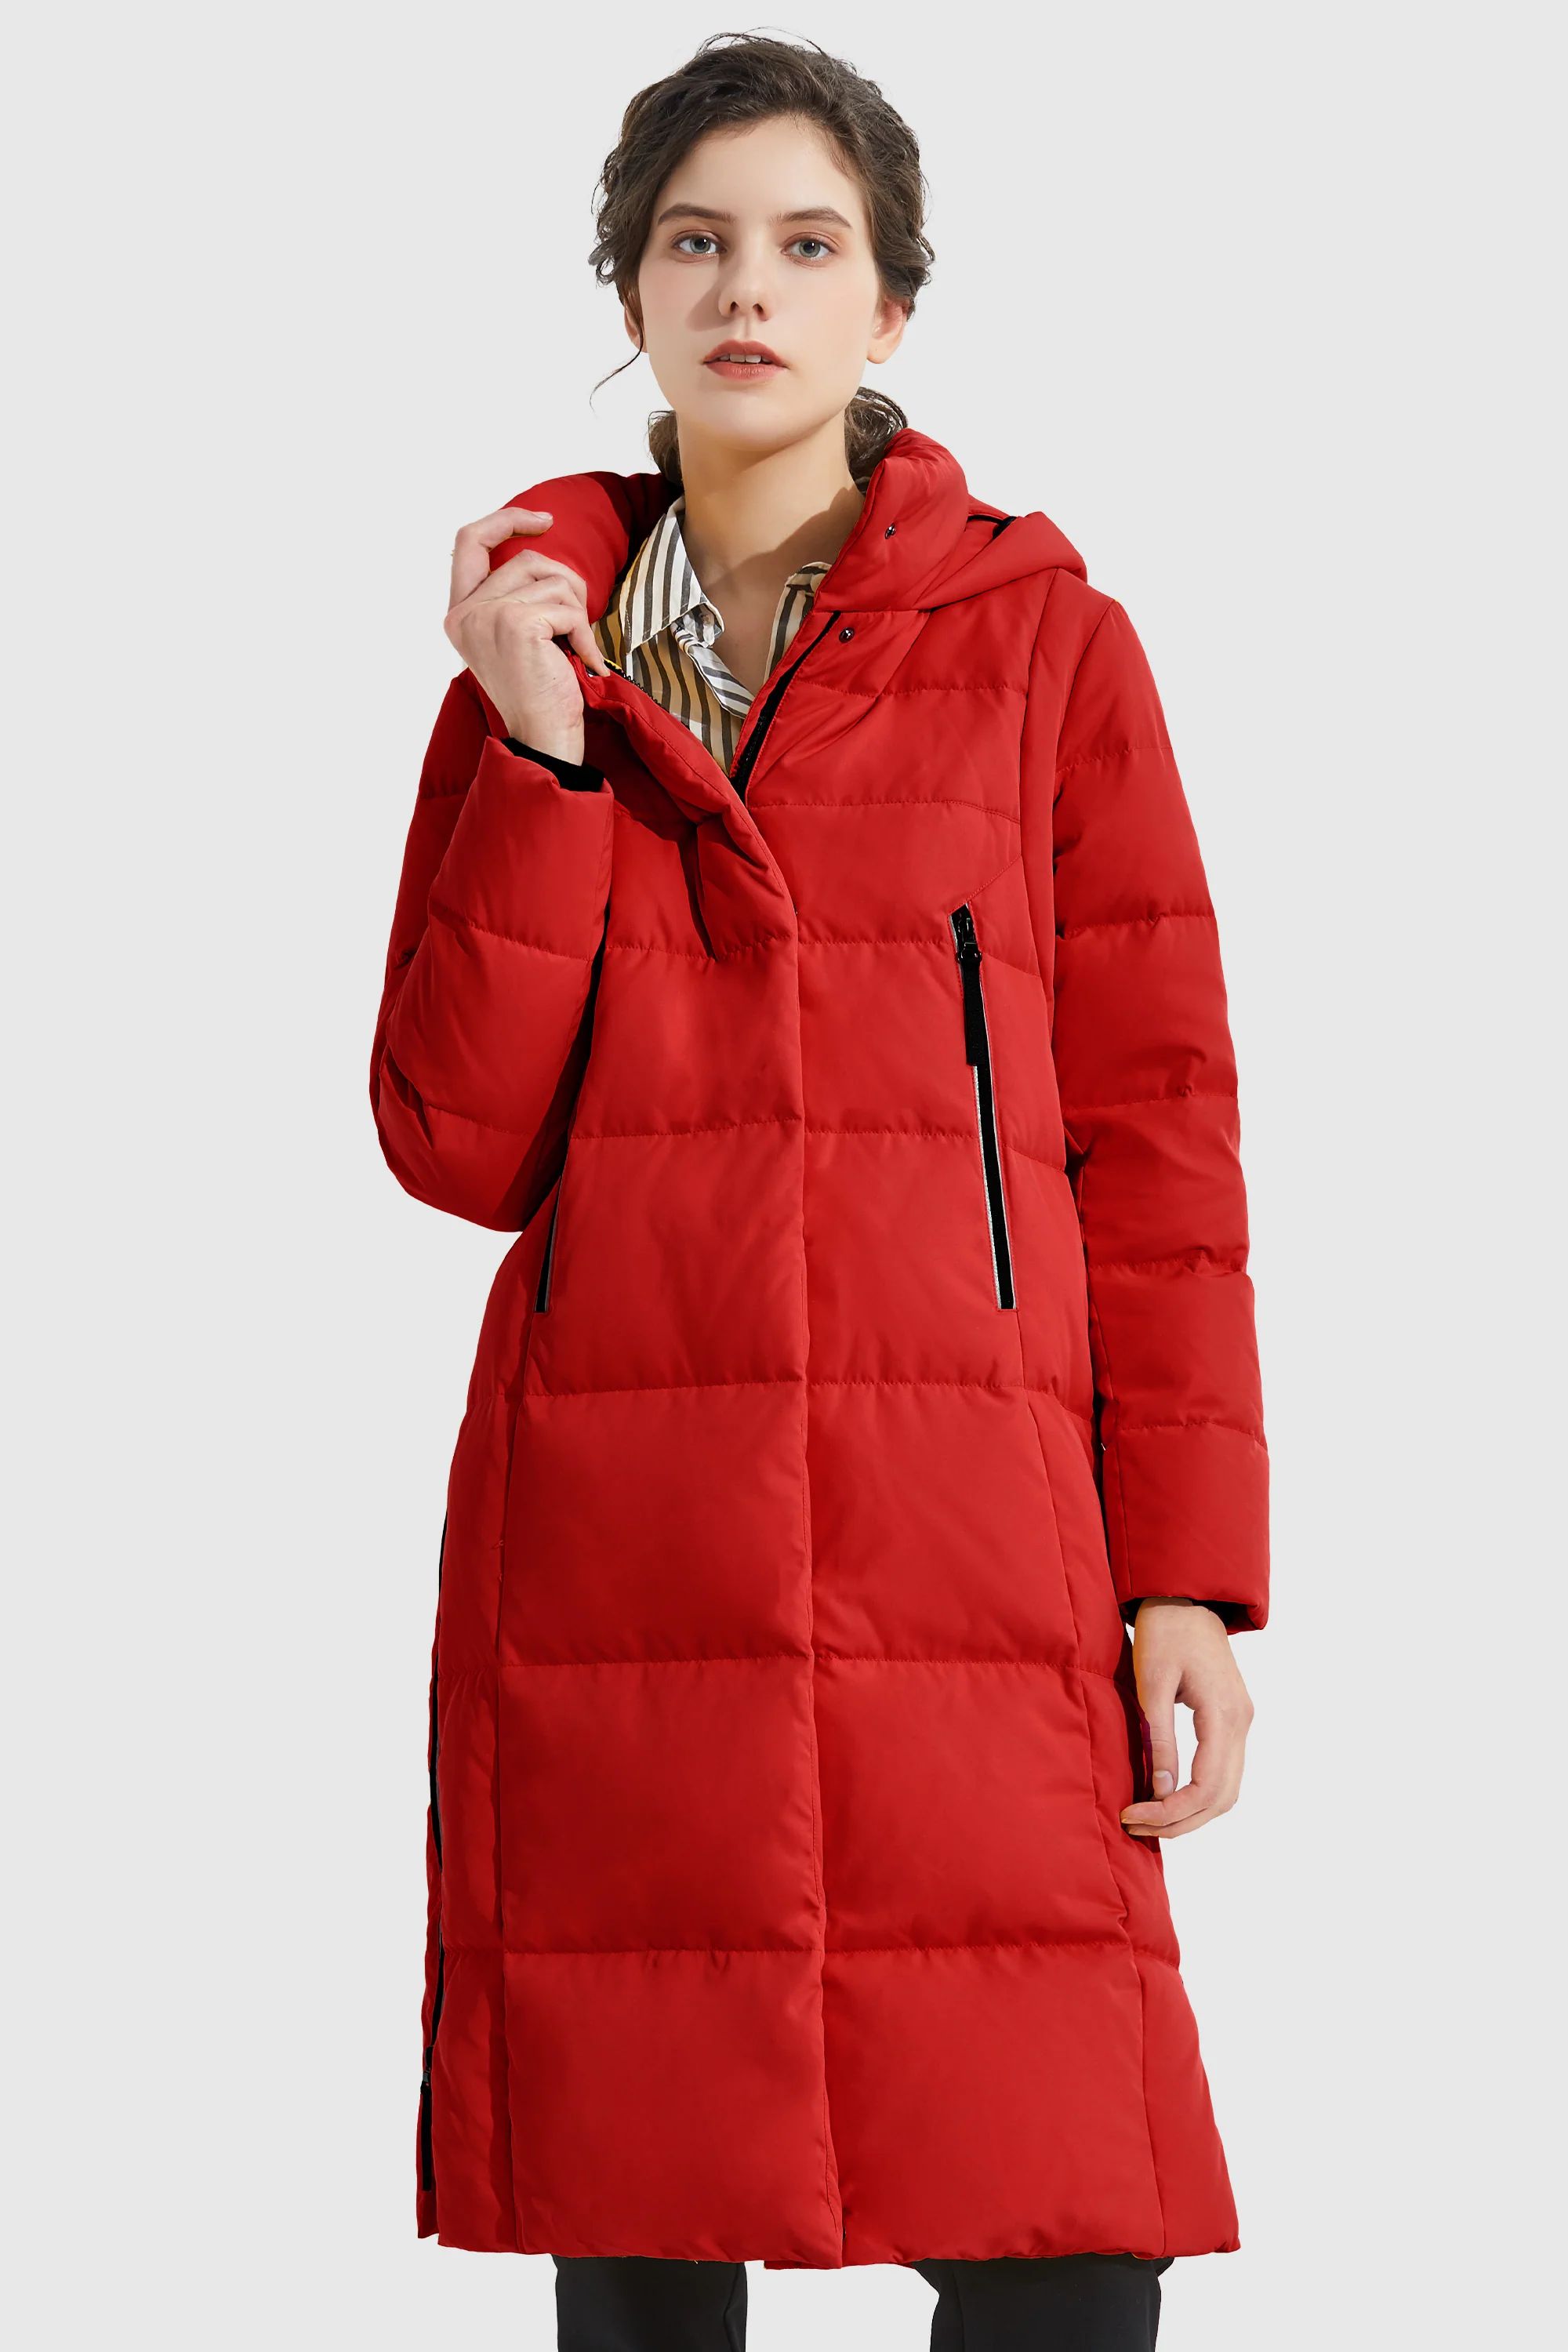 Orolay Women's Knee Length Thickened Down Jacket | Orolay